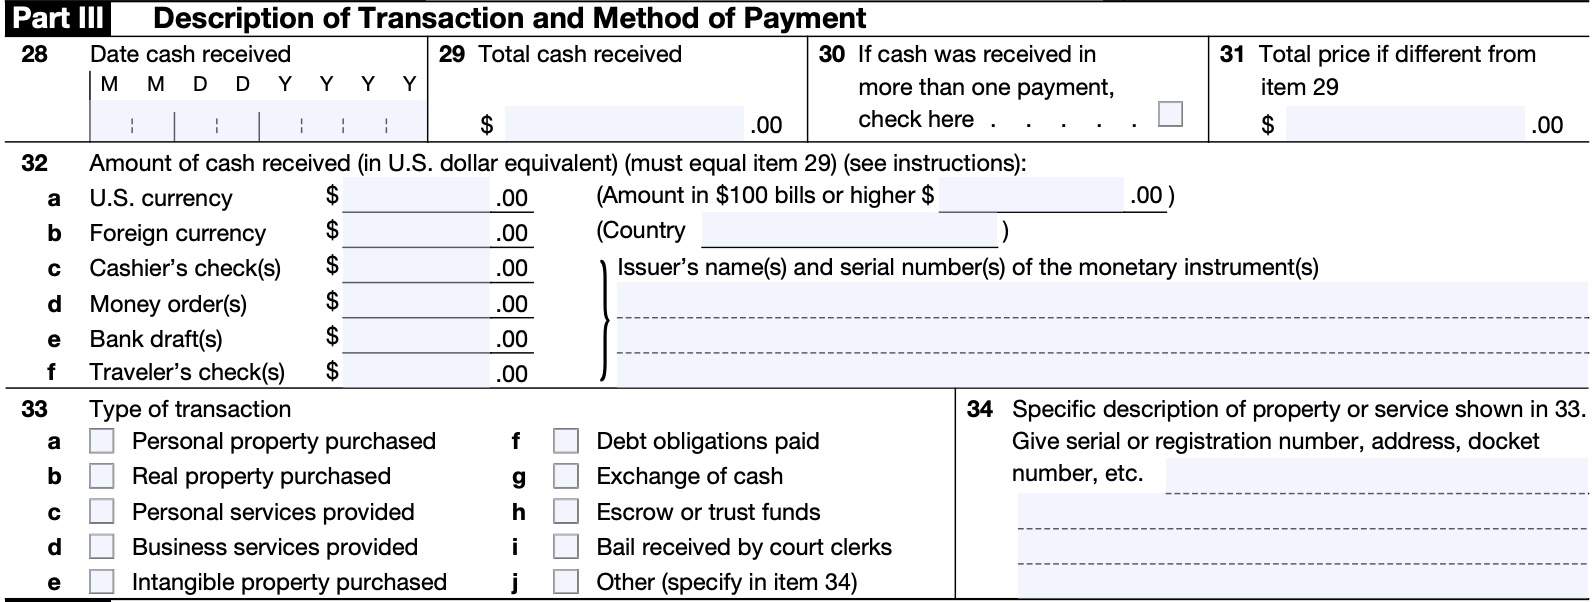 part III: description of transaction and method of payment